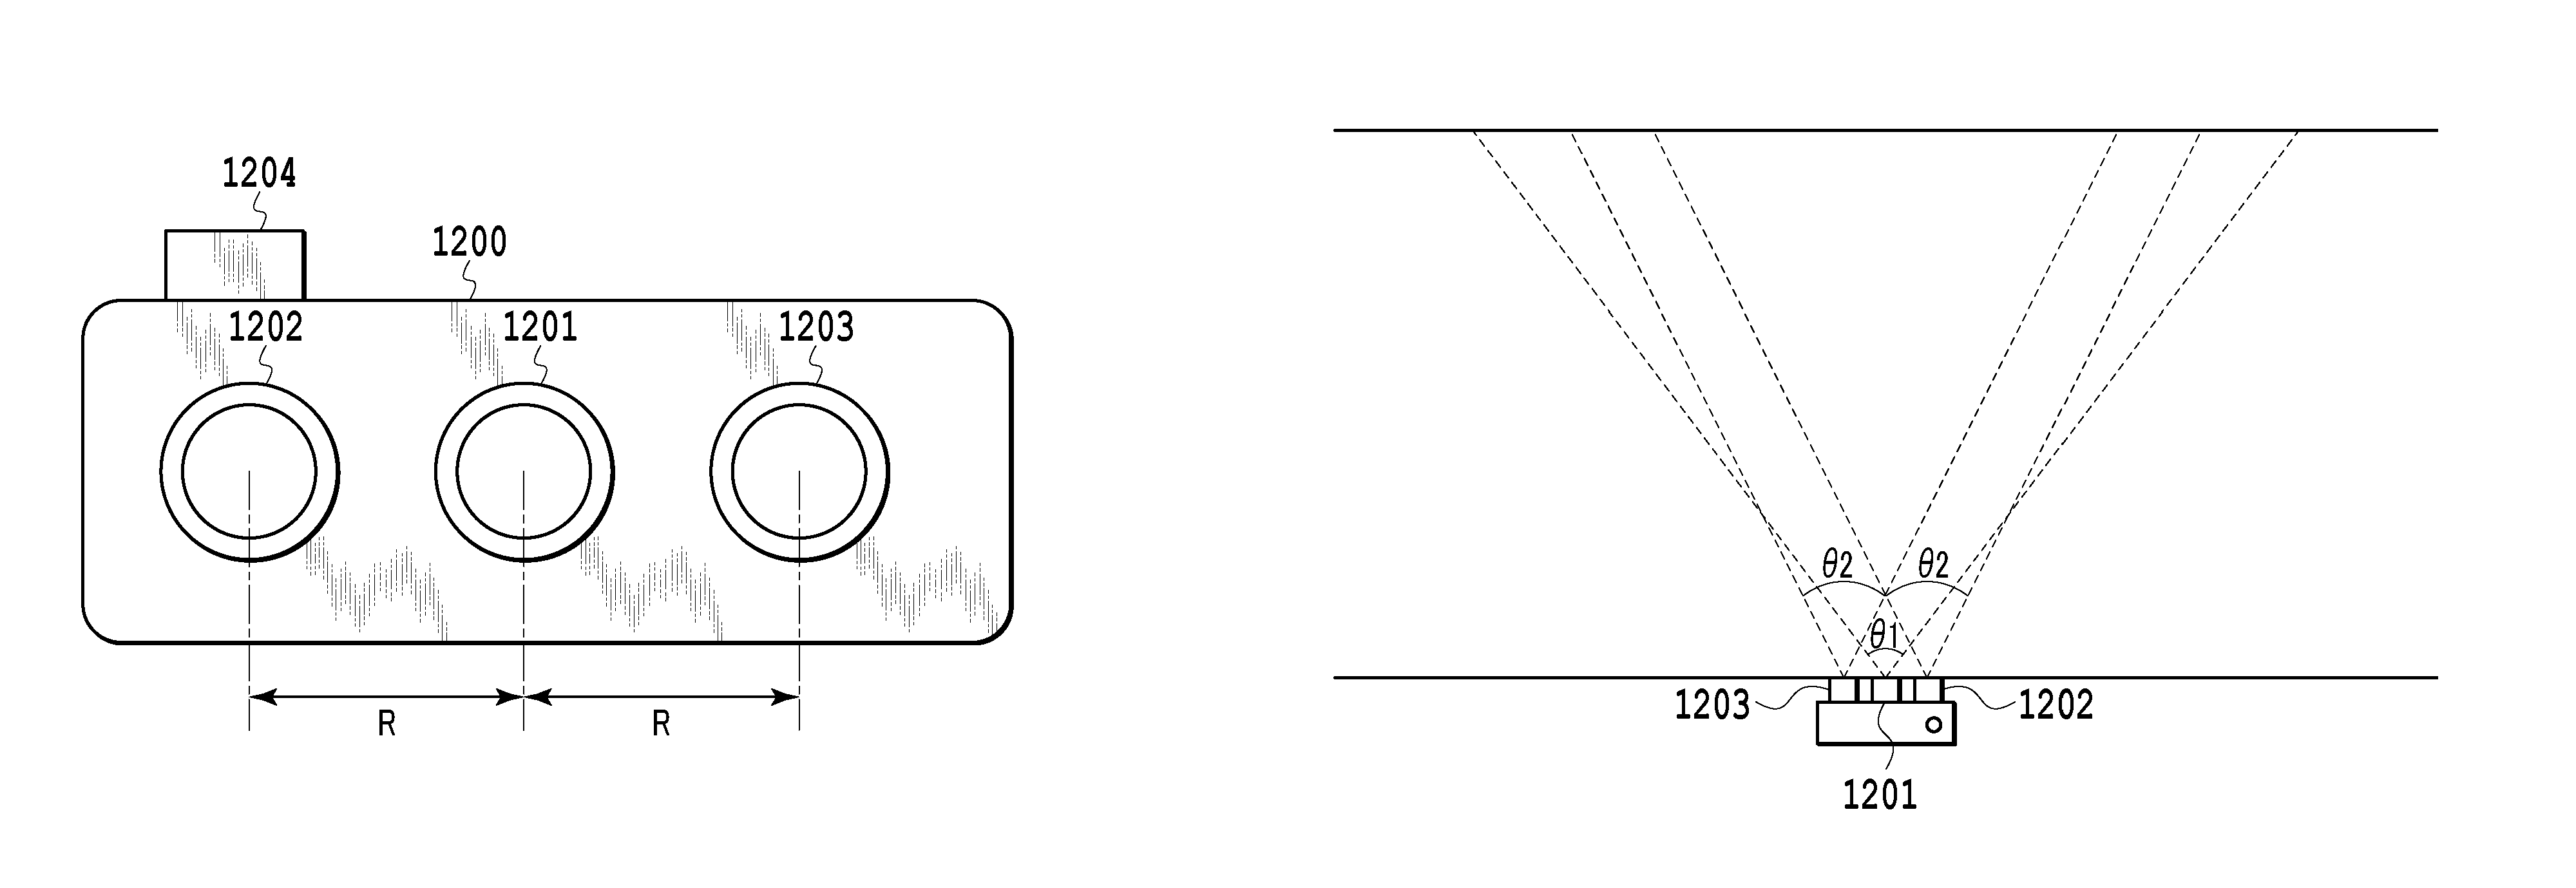 Image-processing apparatus and image-processing method for generating a virtual angle of view